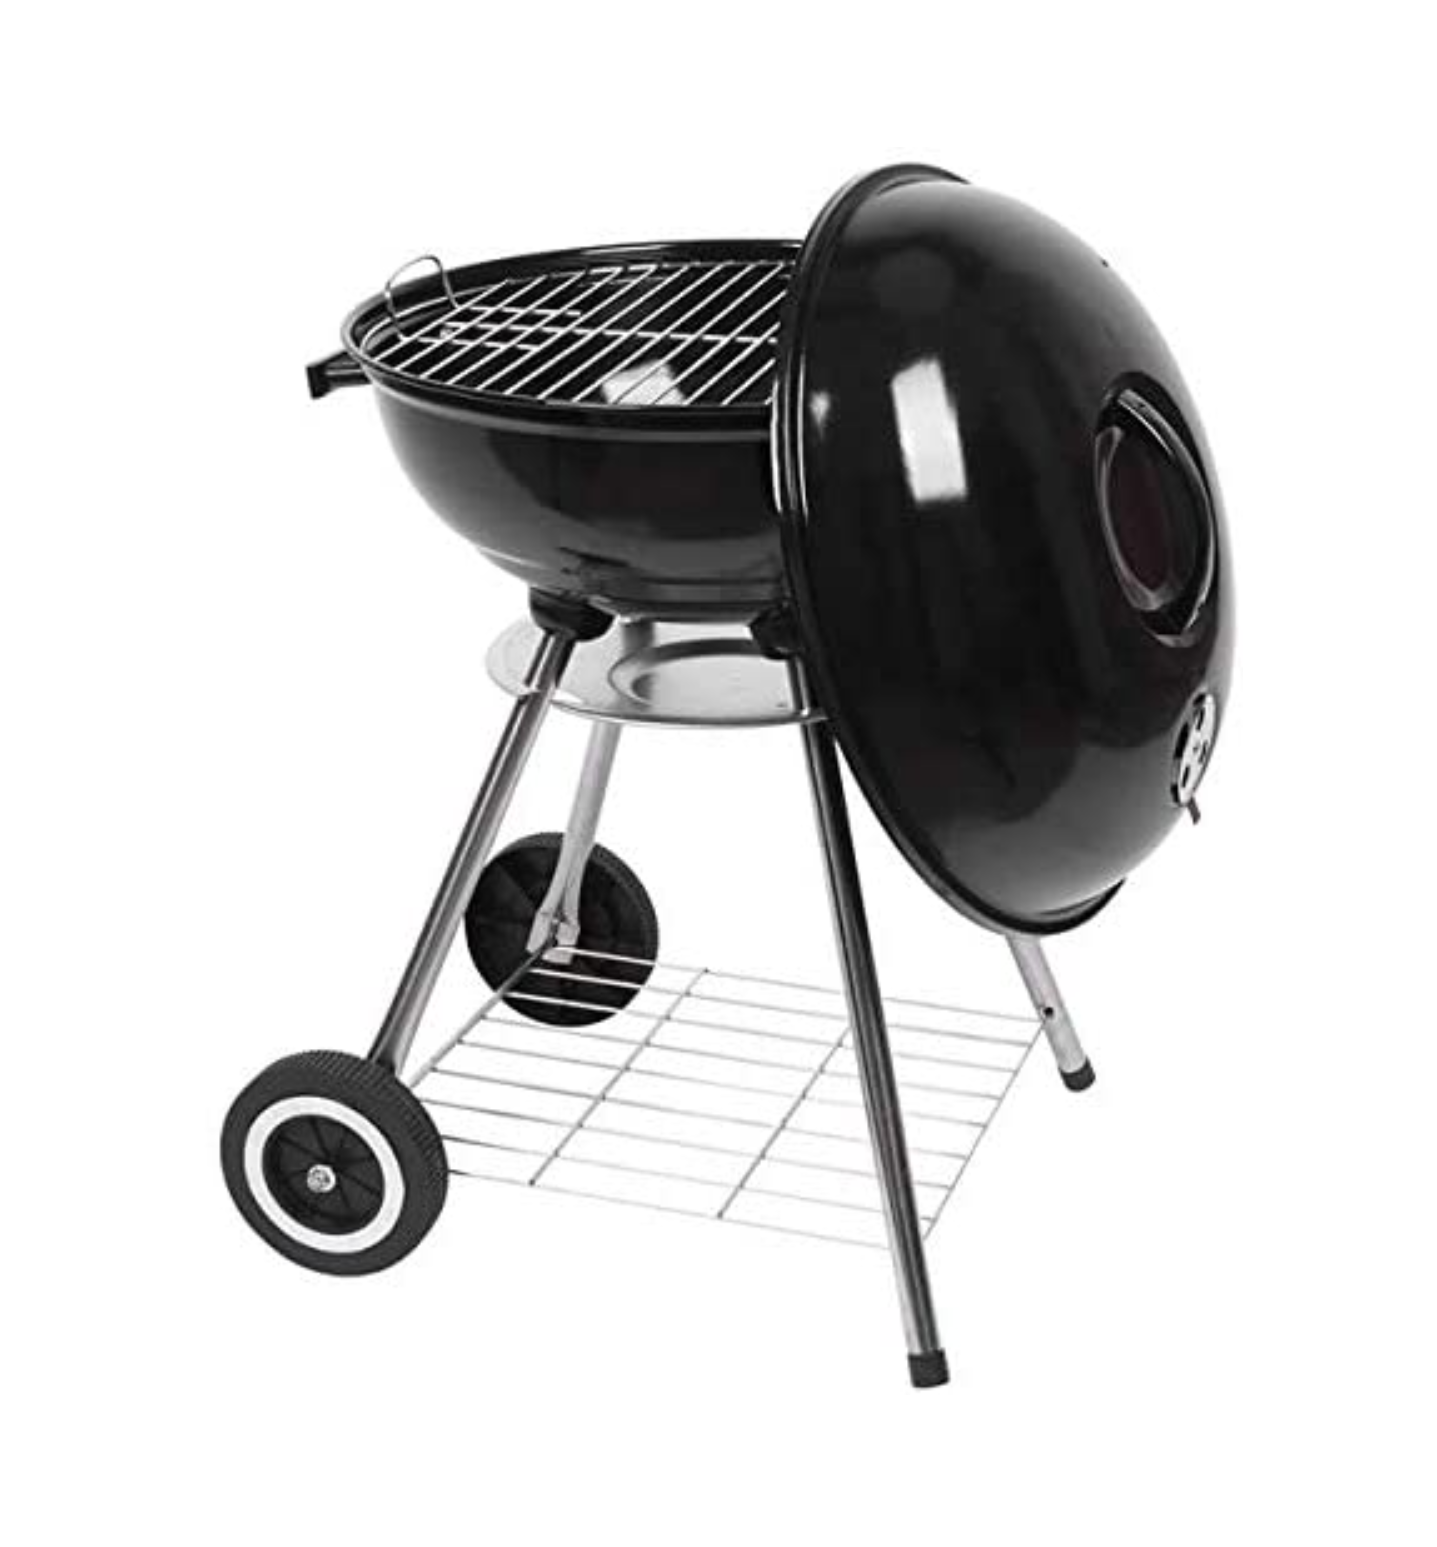 17" Round Portable BBQ Roaster Grill - Asador- Charcoal Grill